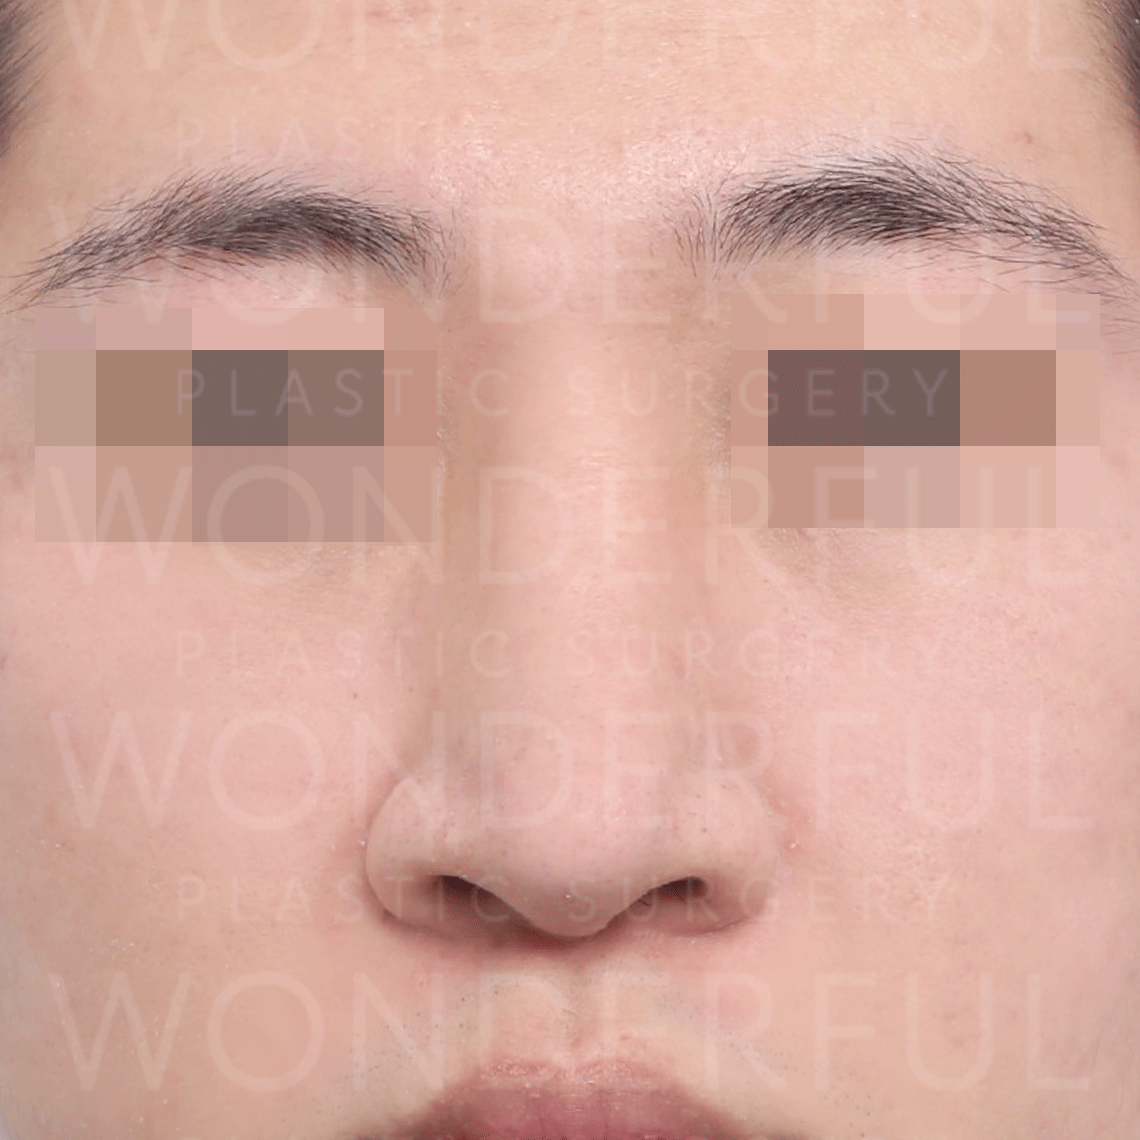 wonderful-plastic-surgery-hospital-korea-wide-nose-rhinoplasty-before-after-results-before-1